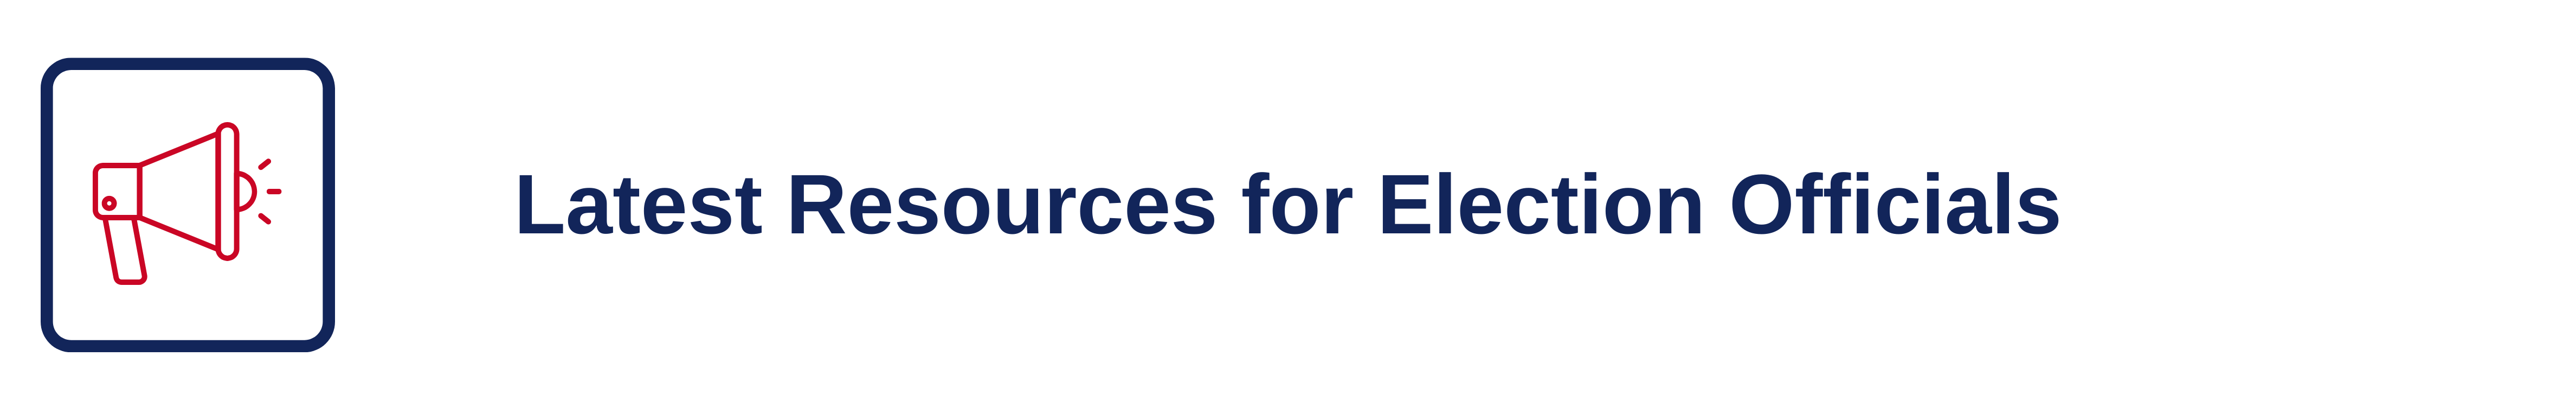 Latest Resources for Election Officials